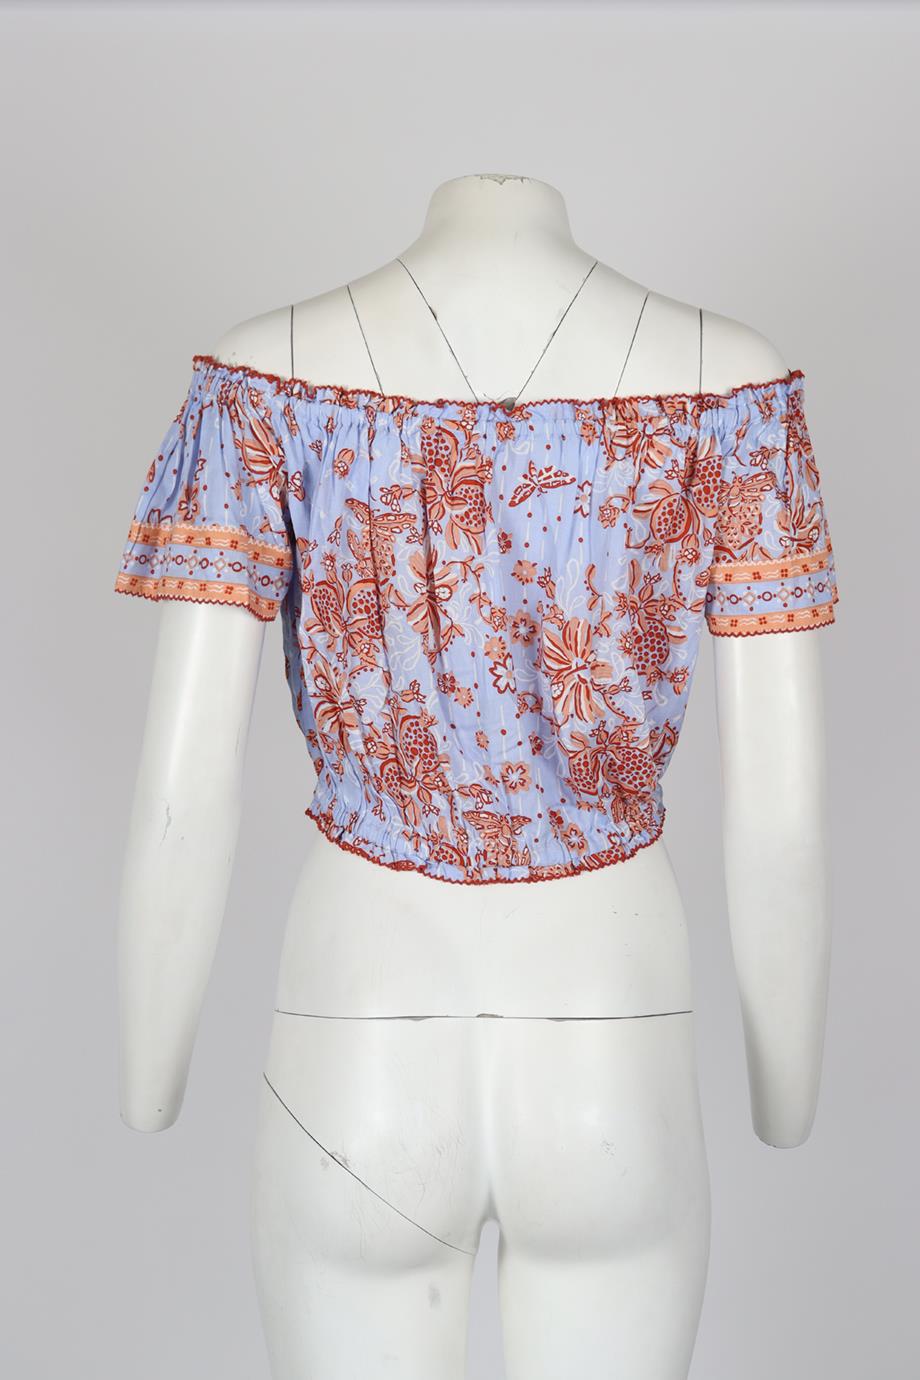 POUPETTE ST BARTH CROPPED OFF THE SHOULDER PRINTED VOILE TOP MEDIUM-LARGE